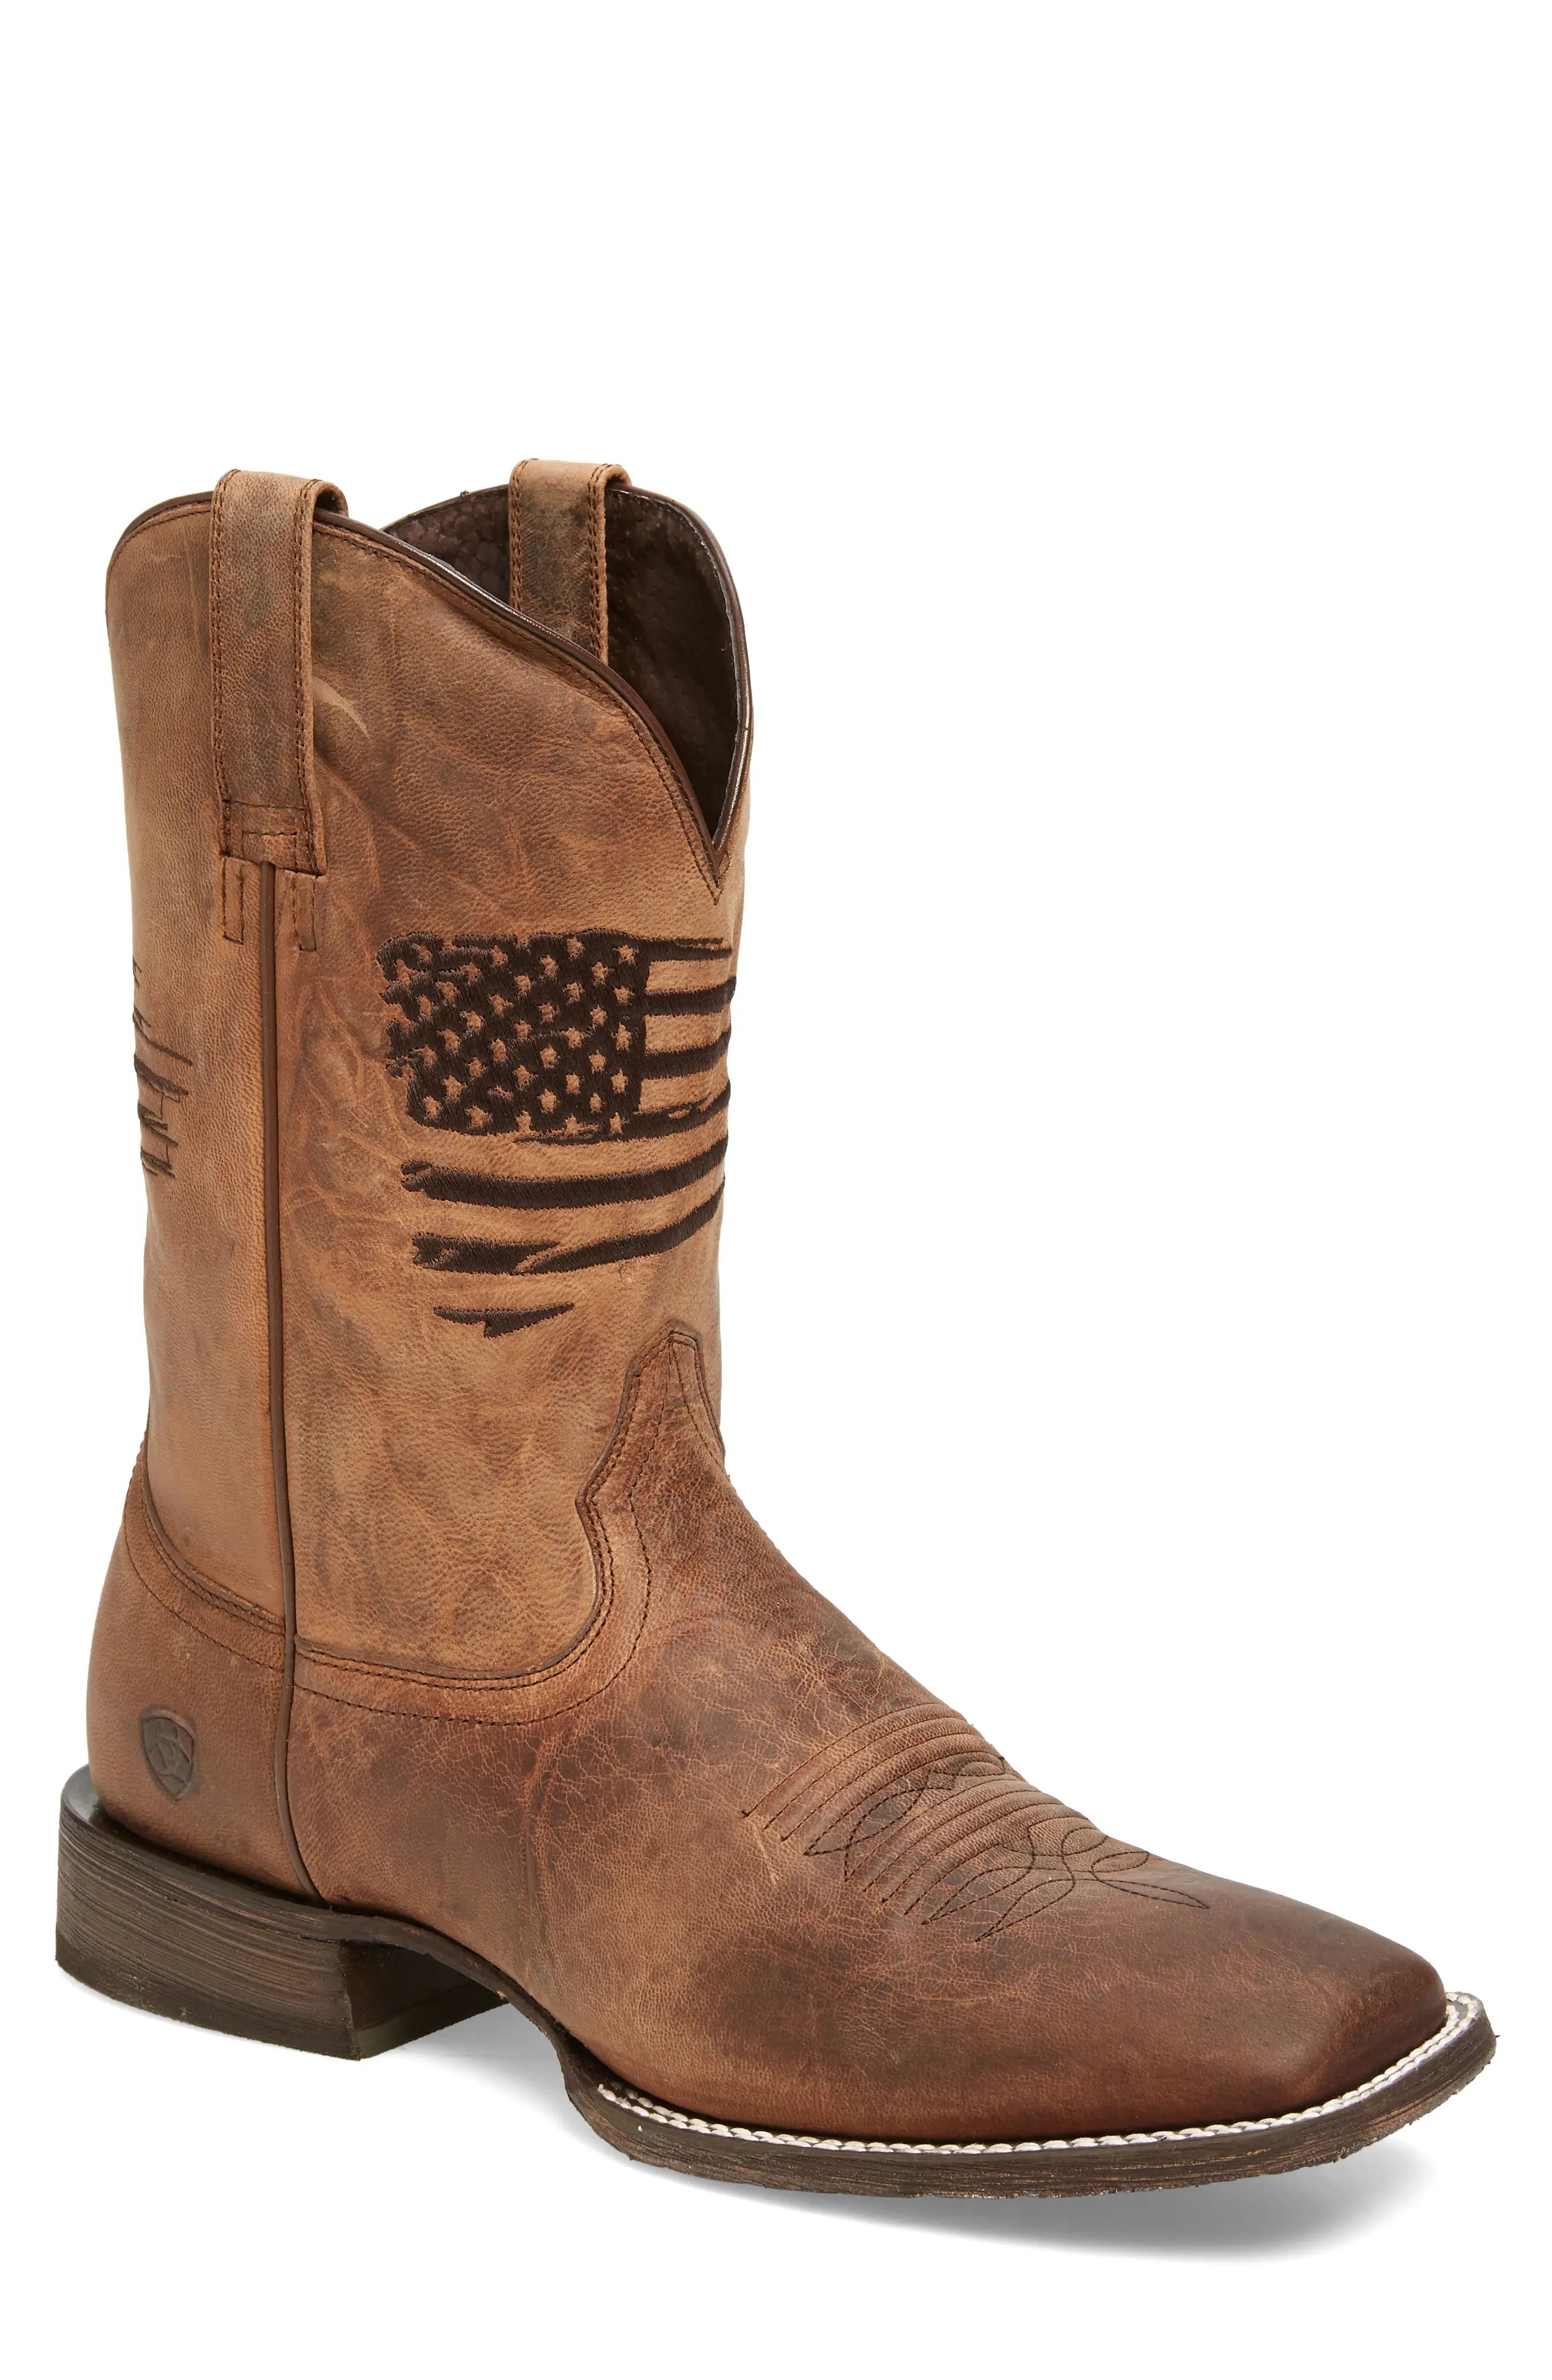 Ariat Circuit Patriot Cowboy Boot in Weathered Tan at Nordstrom, Size 9 | Nordstrom